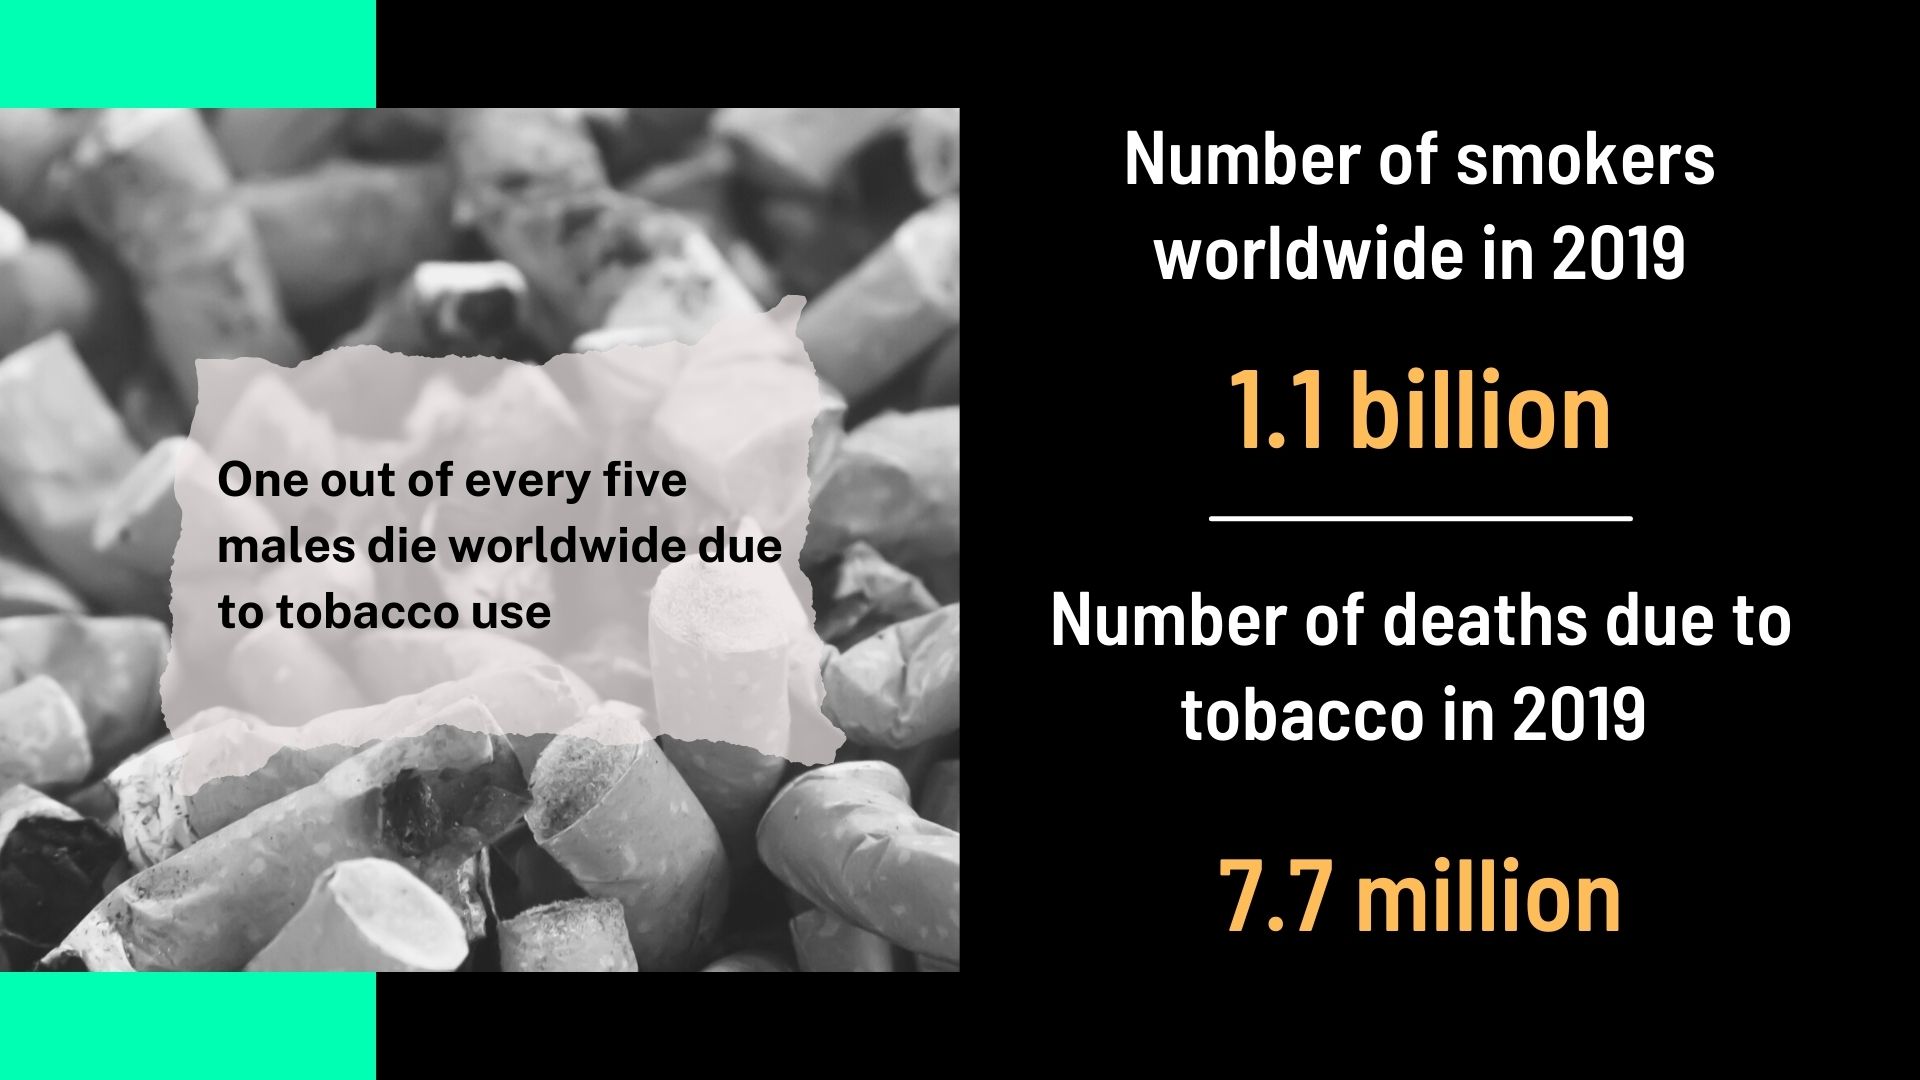 World No Tobacco Day: 780 million people want to quit smoking but only 30% have access to tools to kick the habit